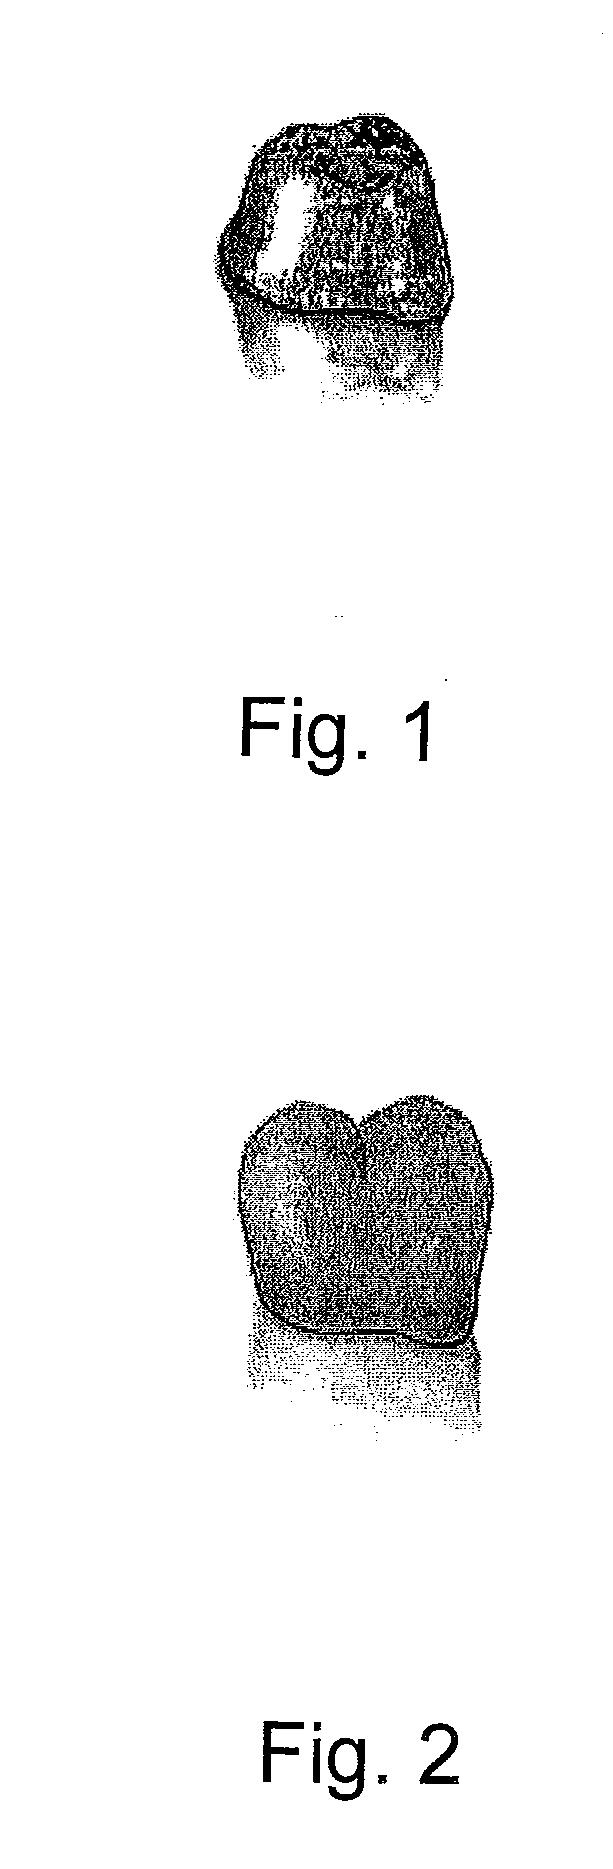 Method of making dental prosthesis and ductile alloys for use therein